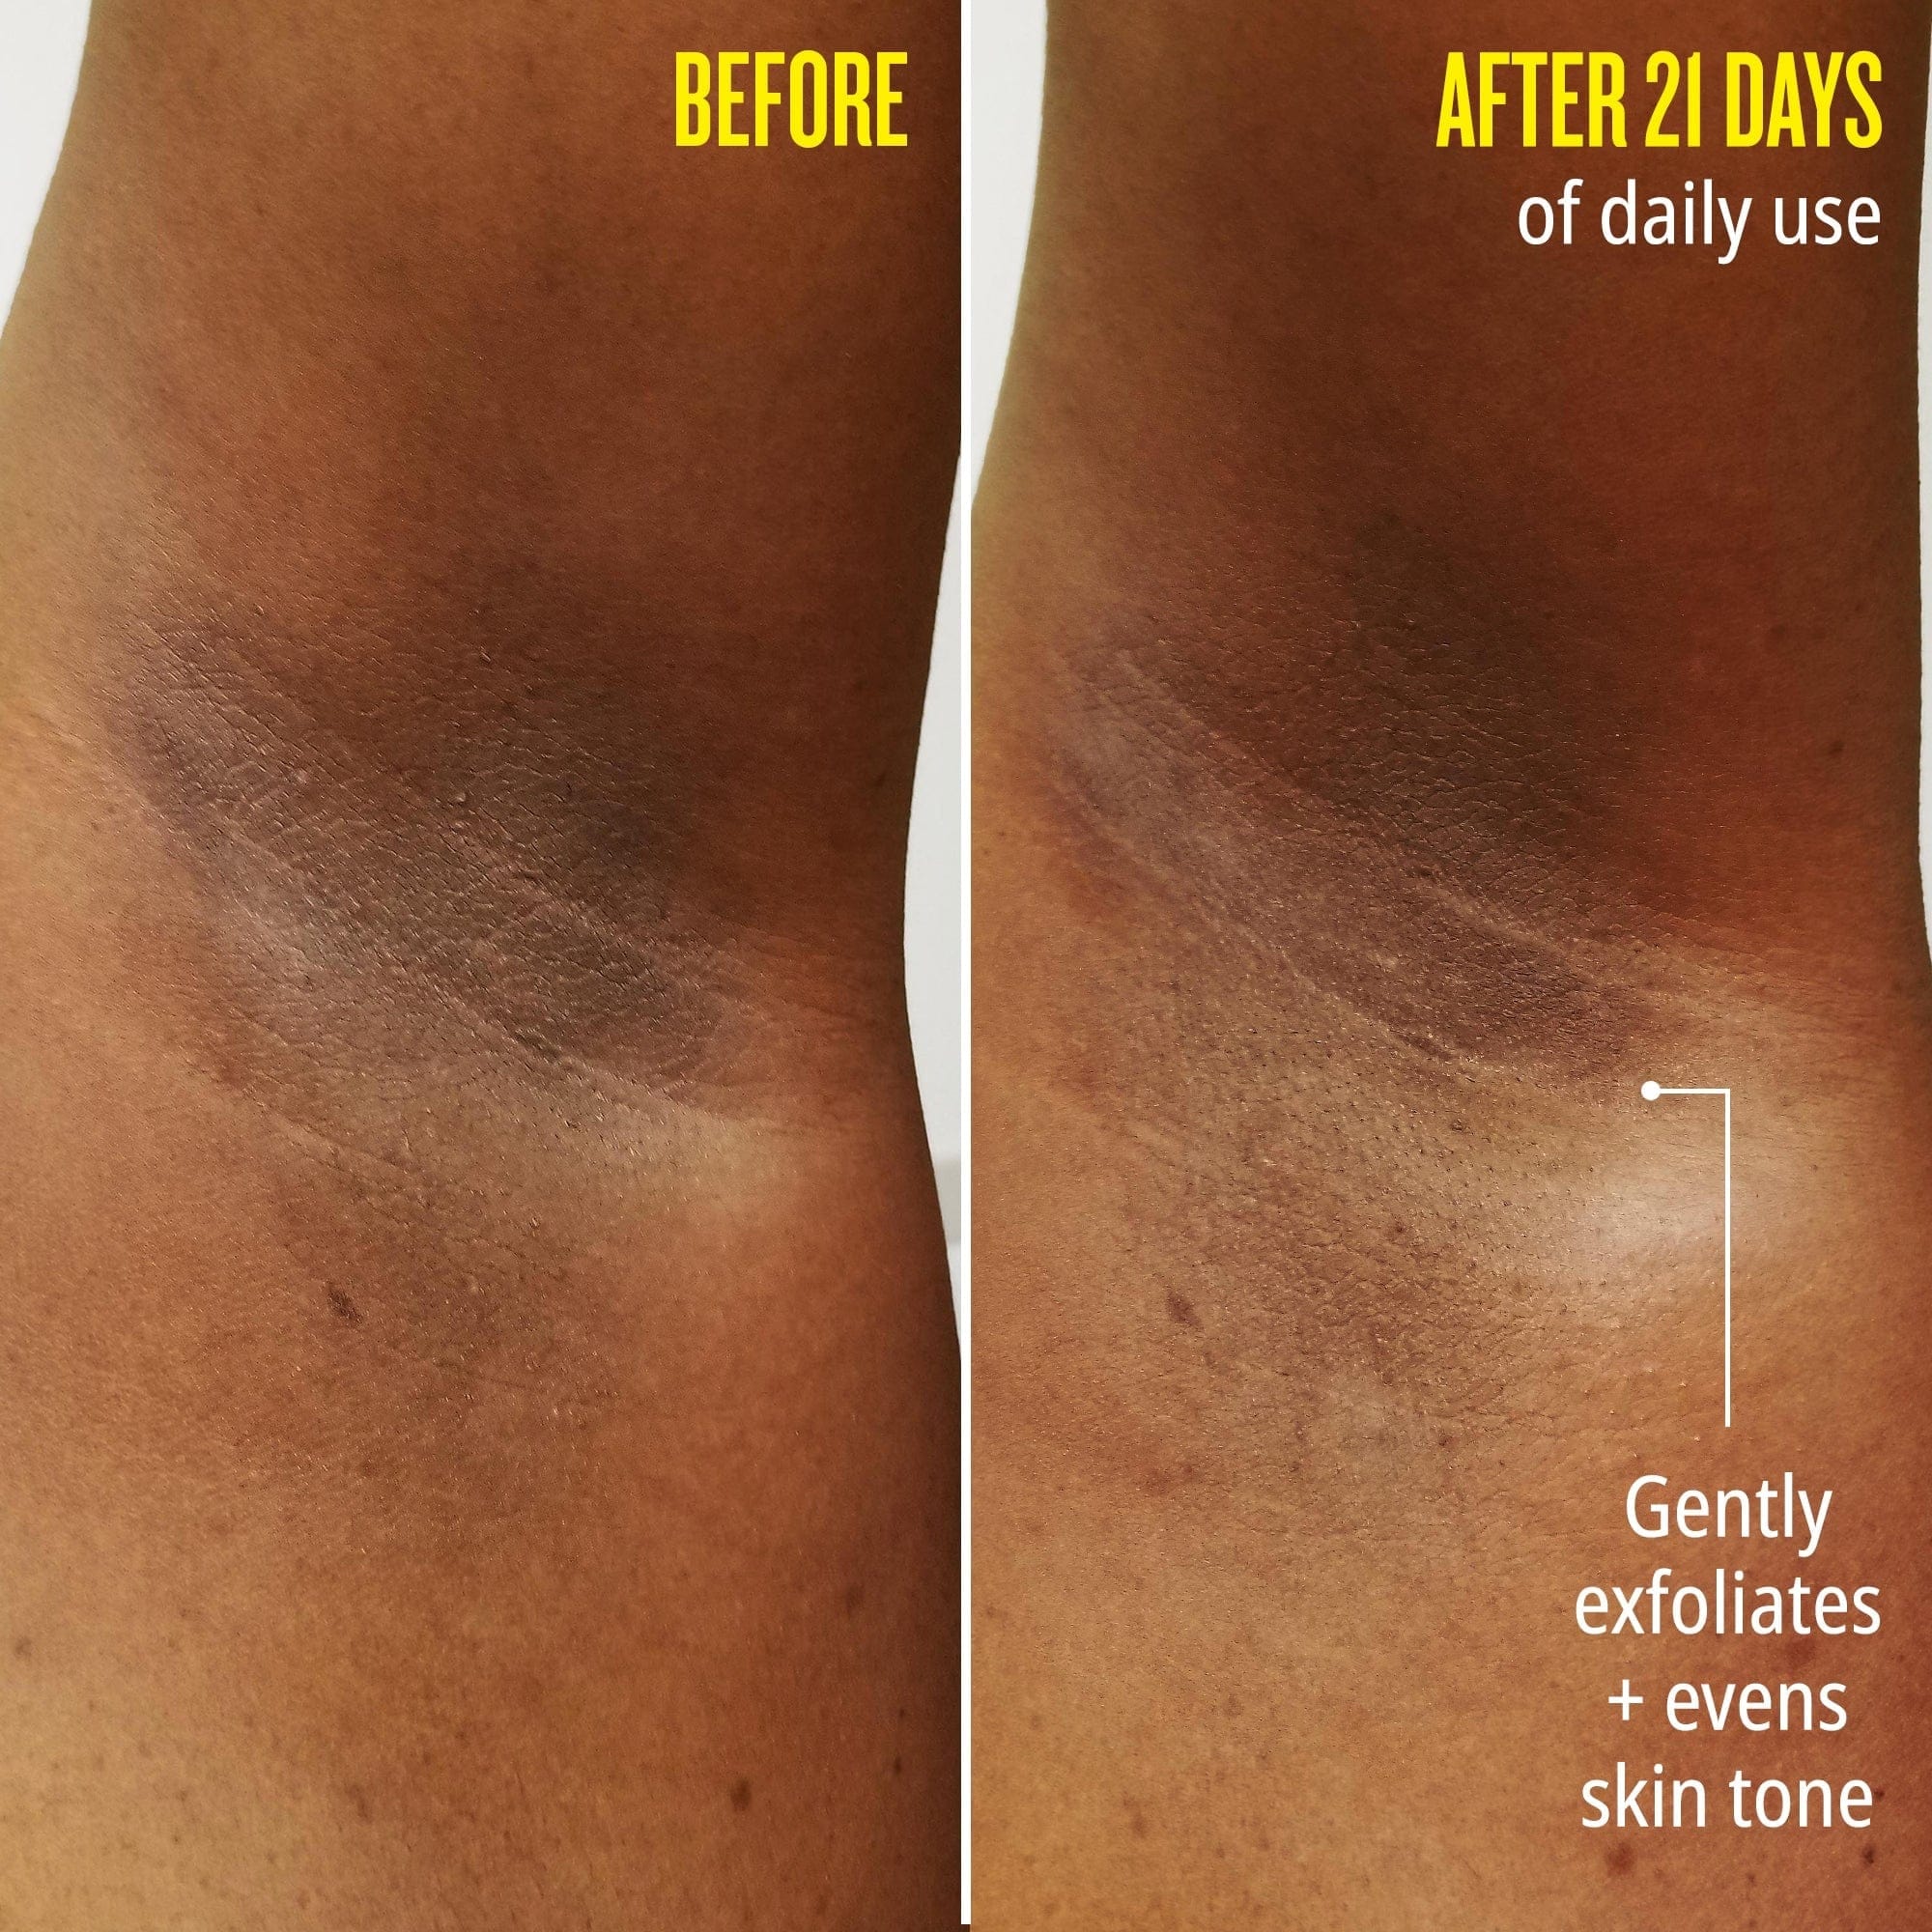 Before // After 21 days of daily use. Gently exfoliates + evens skin tone